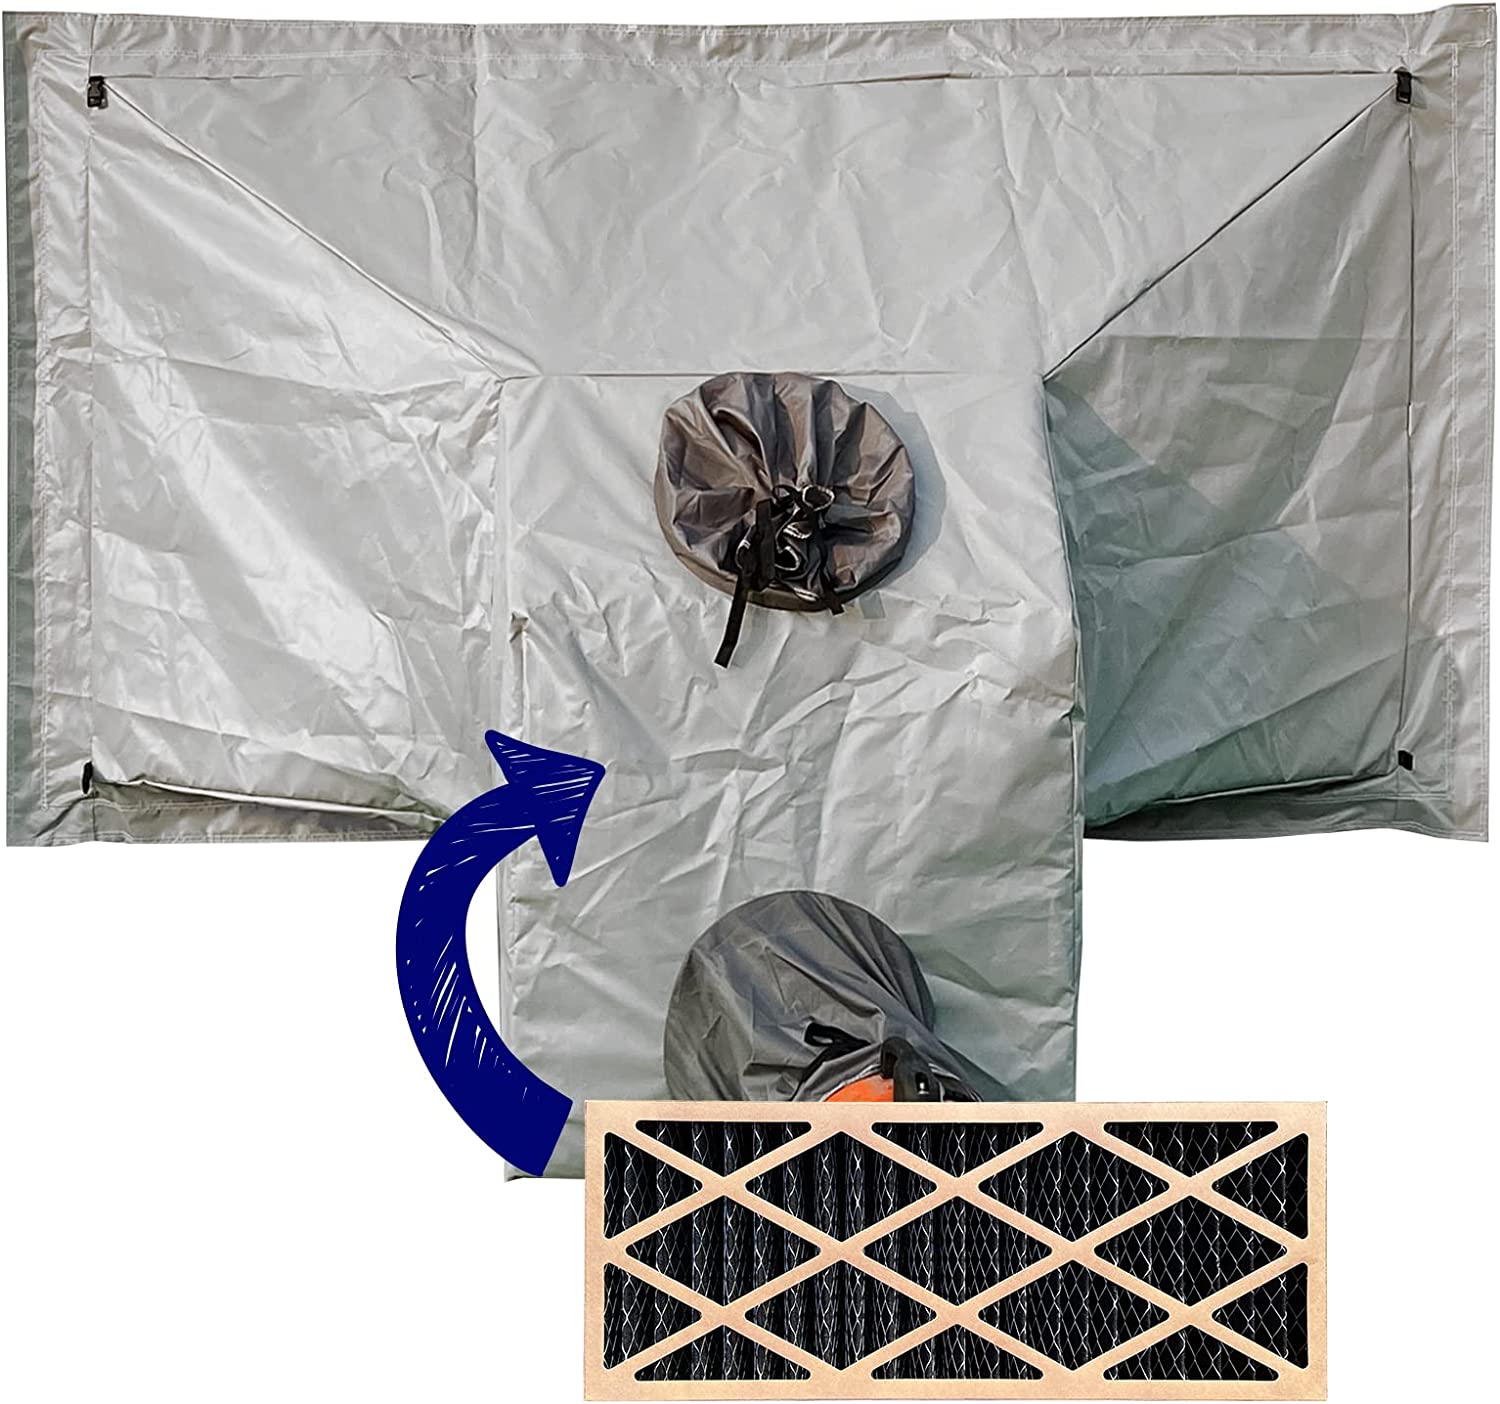 Sewinfla Waterproof Airtight PVC Net Cloth Booth Oversized Exhaust Ventilation Device for Indoor, Air Circulation Optimized and Prevent Overspray - Only Applicable to Sewinfla Airtight Inflatable Paint Booth